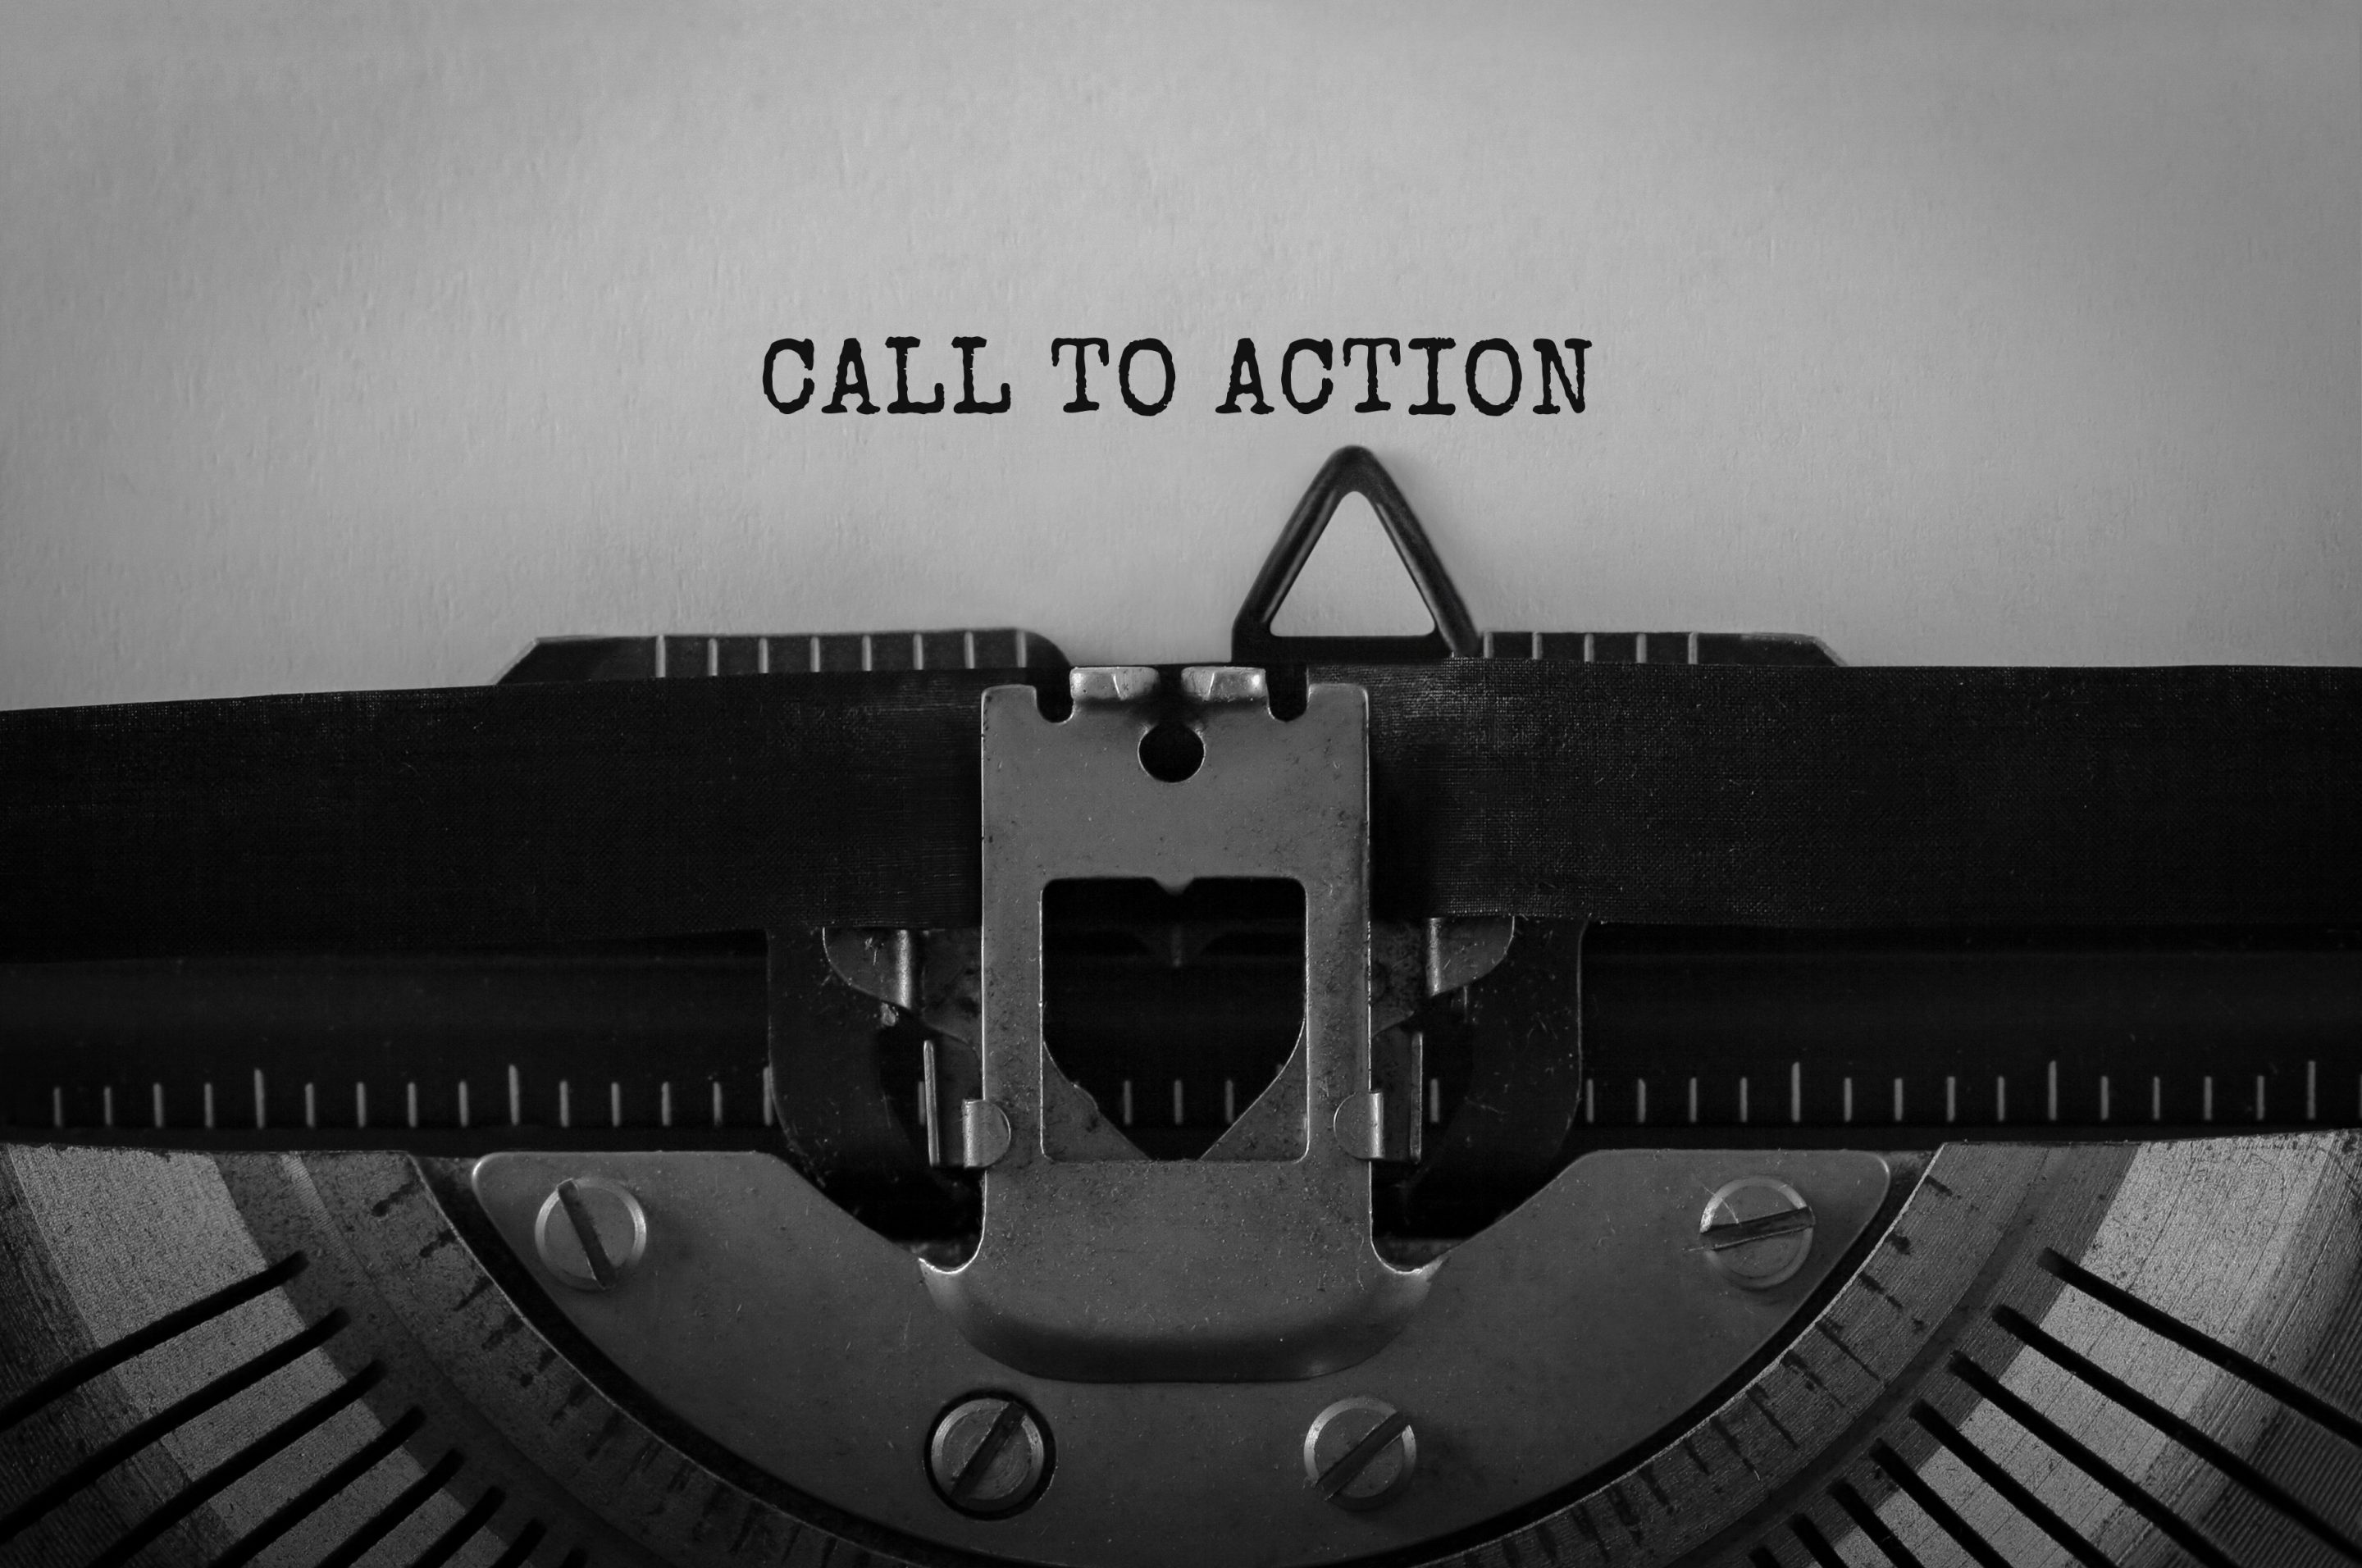 A typewriter with the word "call to action" written on it, ready to create a compelling call to action for your website.